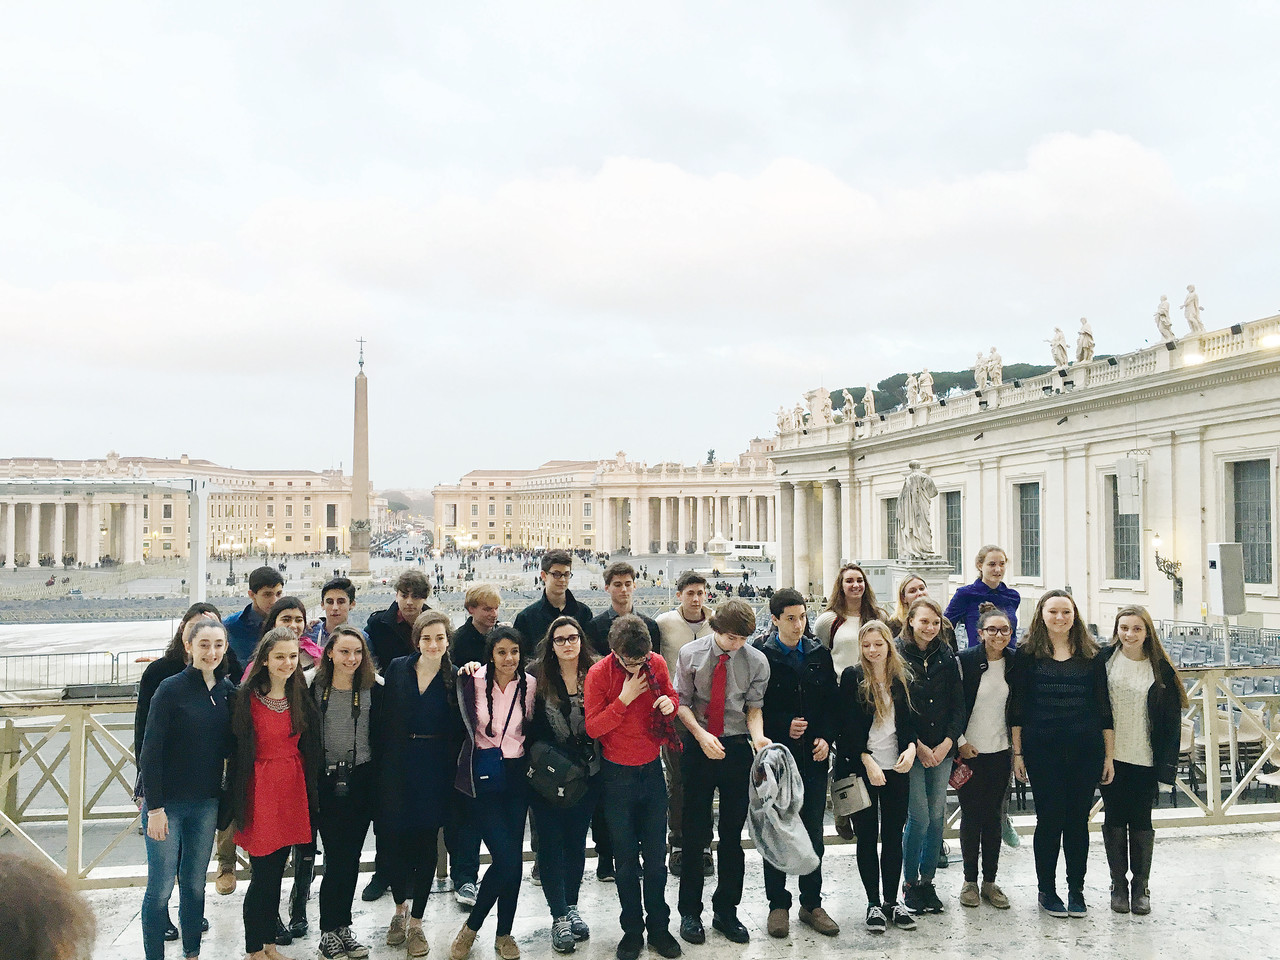 Twenty-eight students from The Prout School Choir take in the history at St. Peter’s Square, the large plaza located directly in front of St. Peter’s Basilica in the Vatican City. Students in the choir are currently spending their February vacation in Italy, where they are participating in a musical pilgrimage to celebrate the Jubilee Year of Mercy.